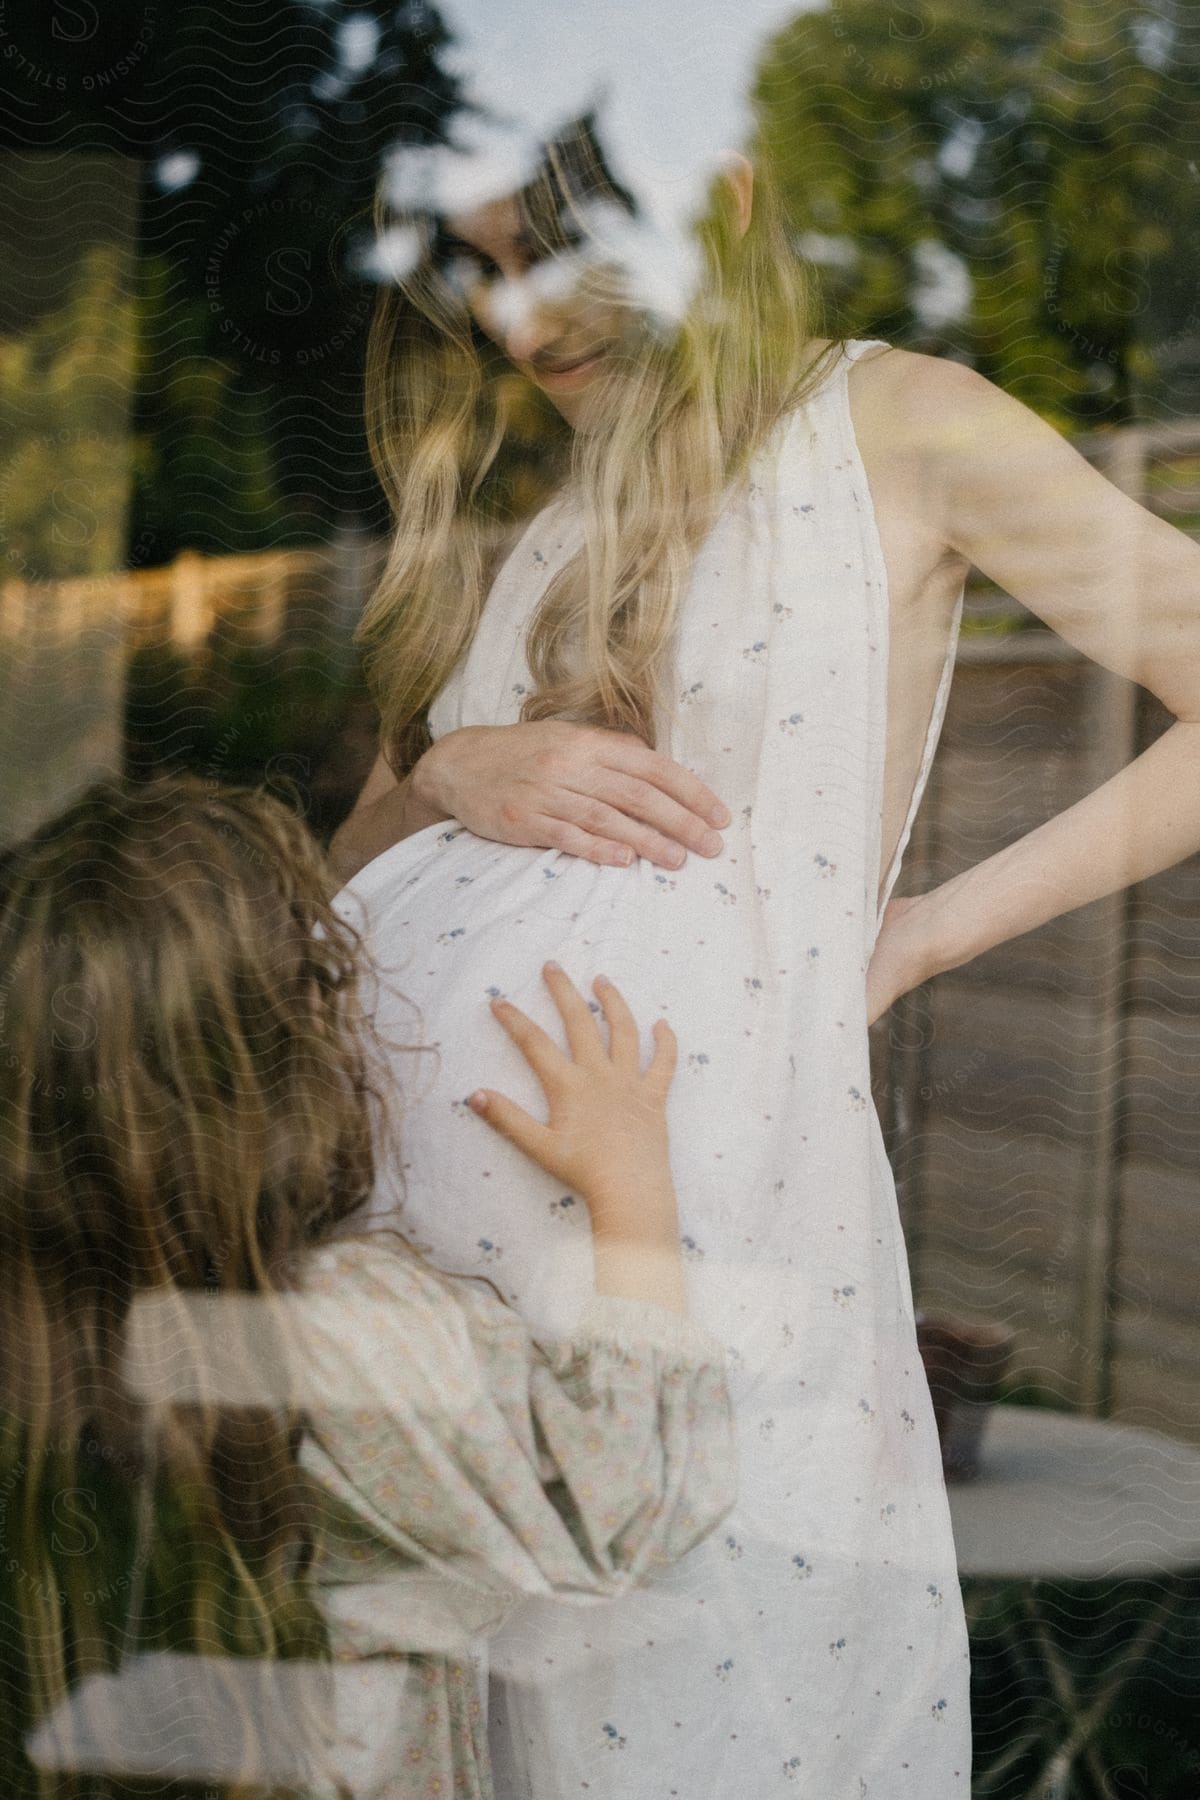 A child kissing a pregnant woman's belly.